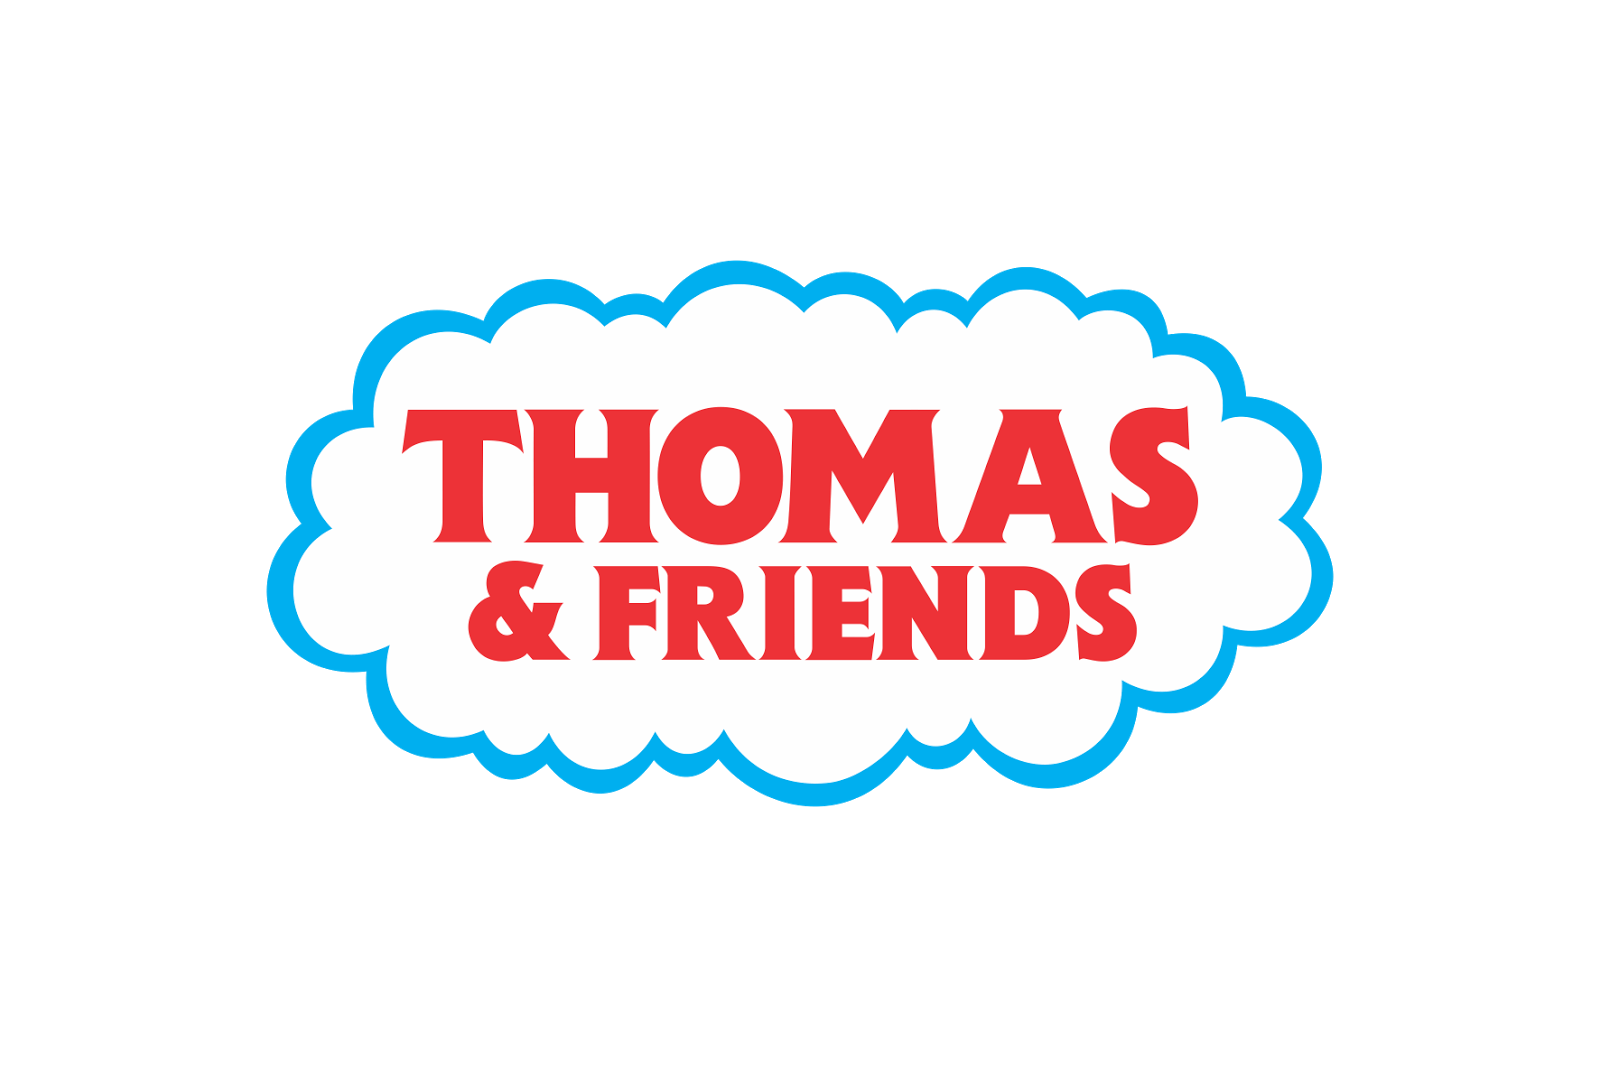 Thomas and Friends Logo - Thomas and Friends | International Entertainment Project Wikia ...